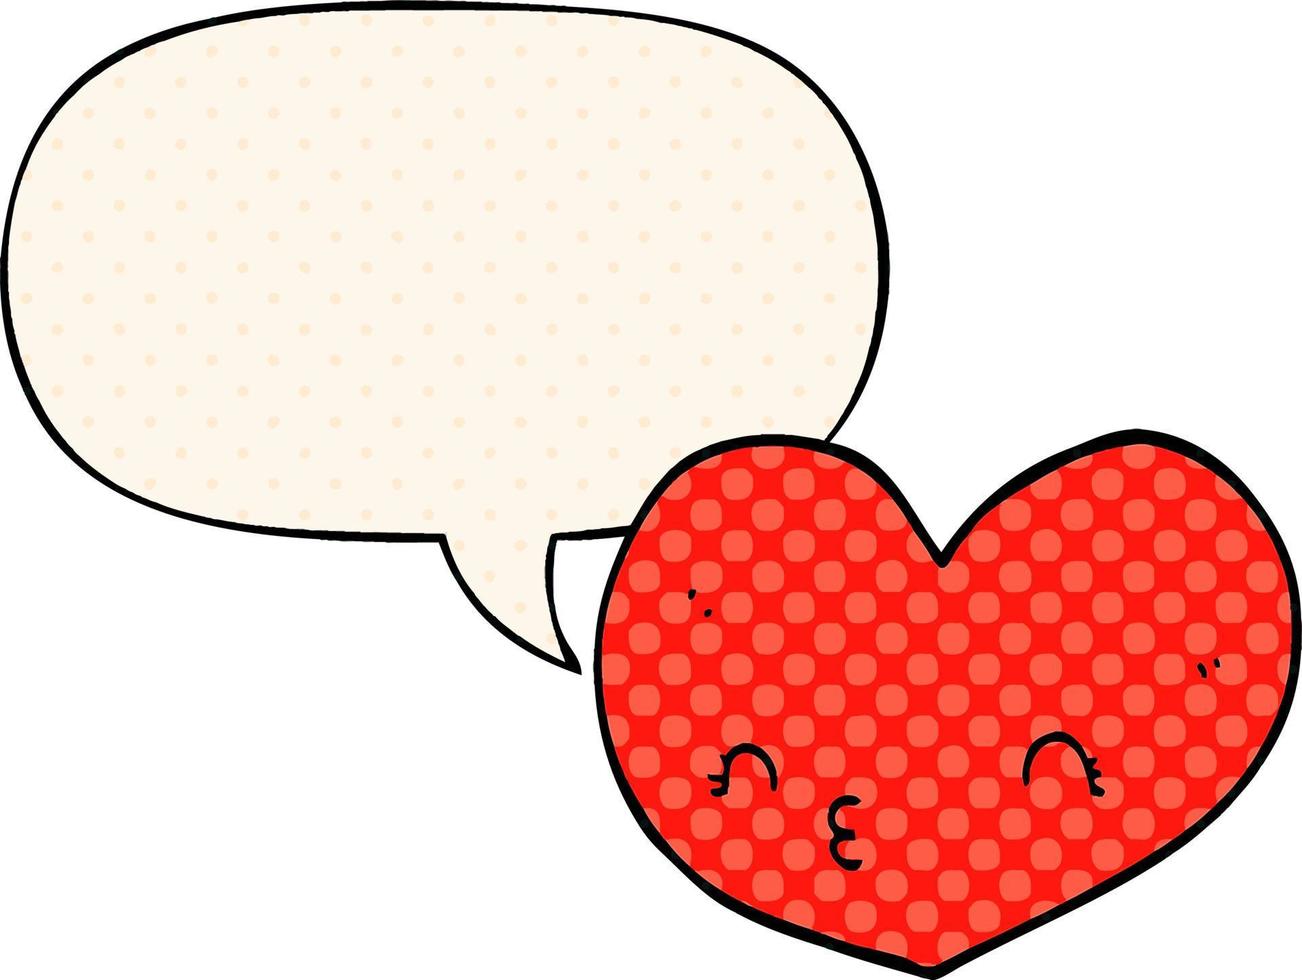 cartoon heart and face and speech bubble in comic book style vector